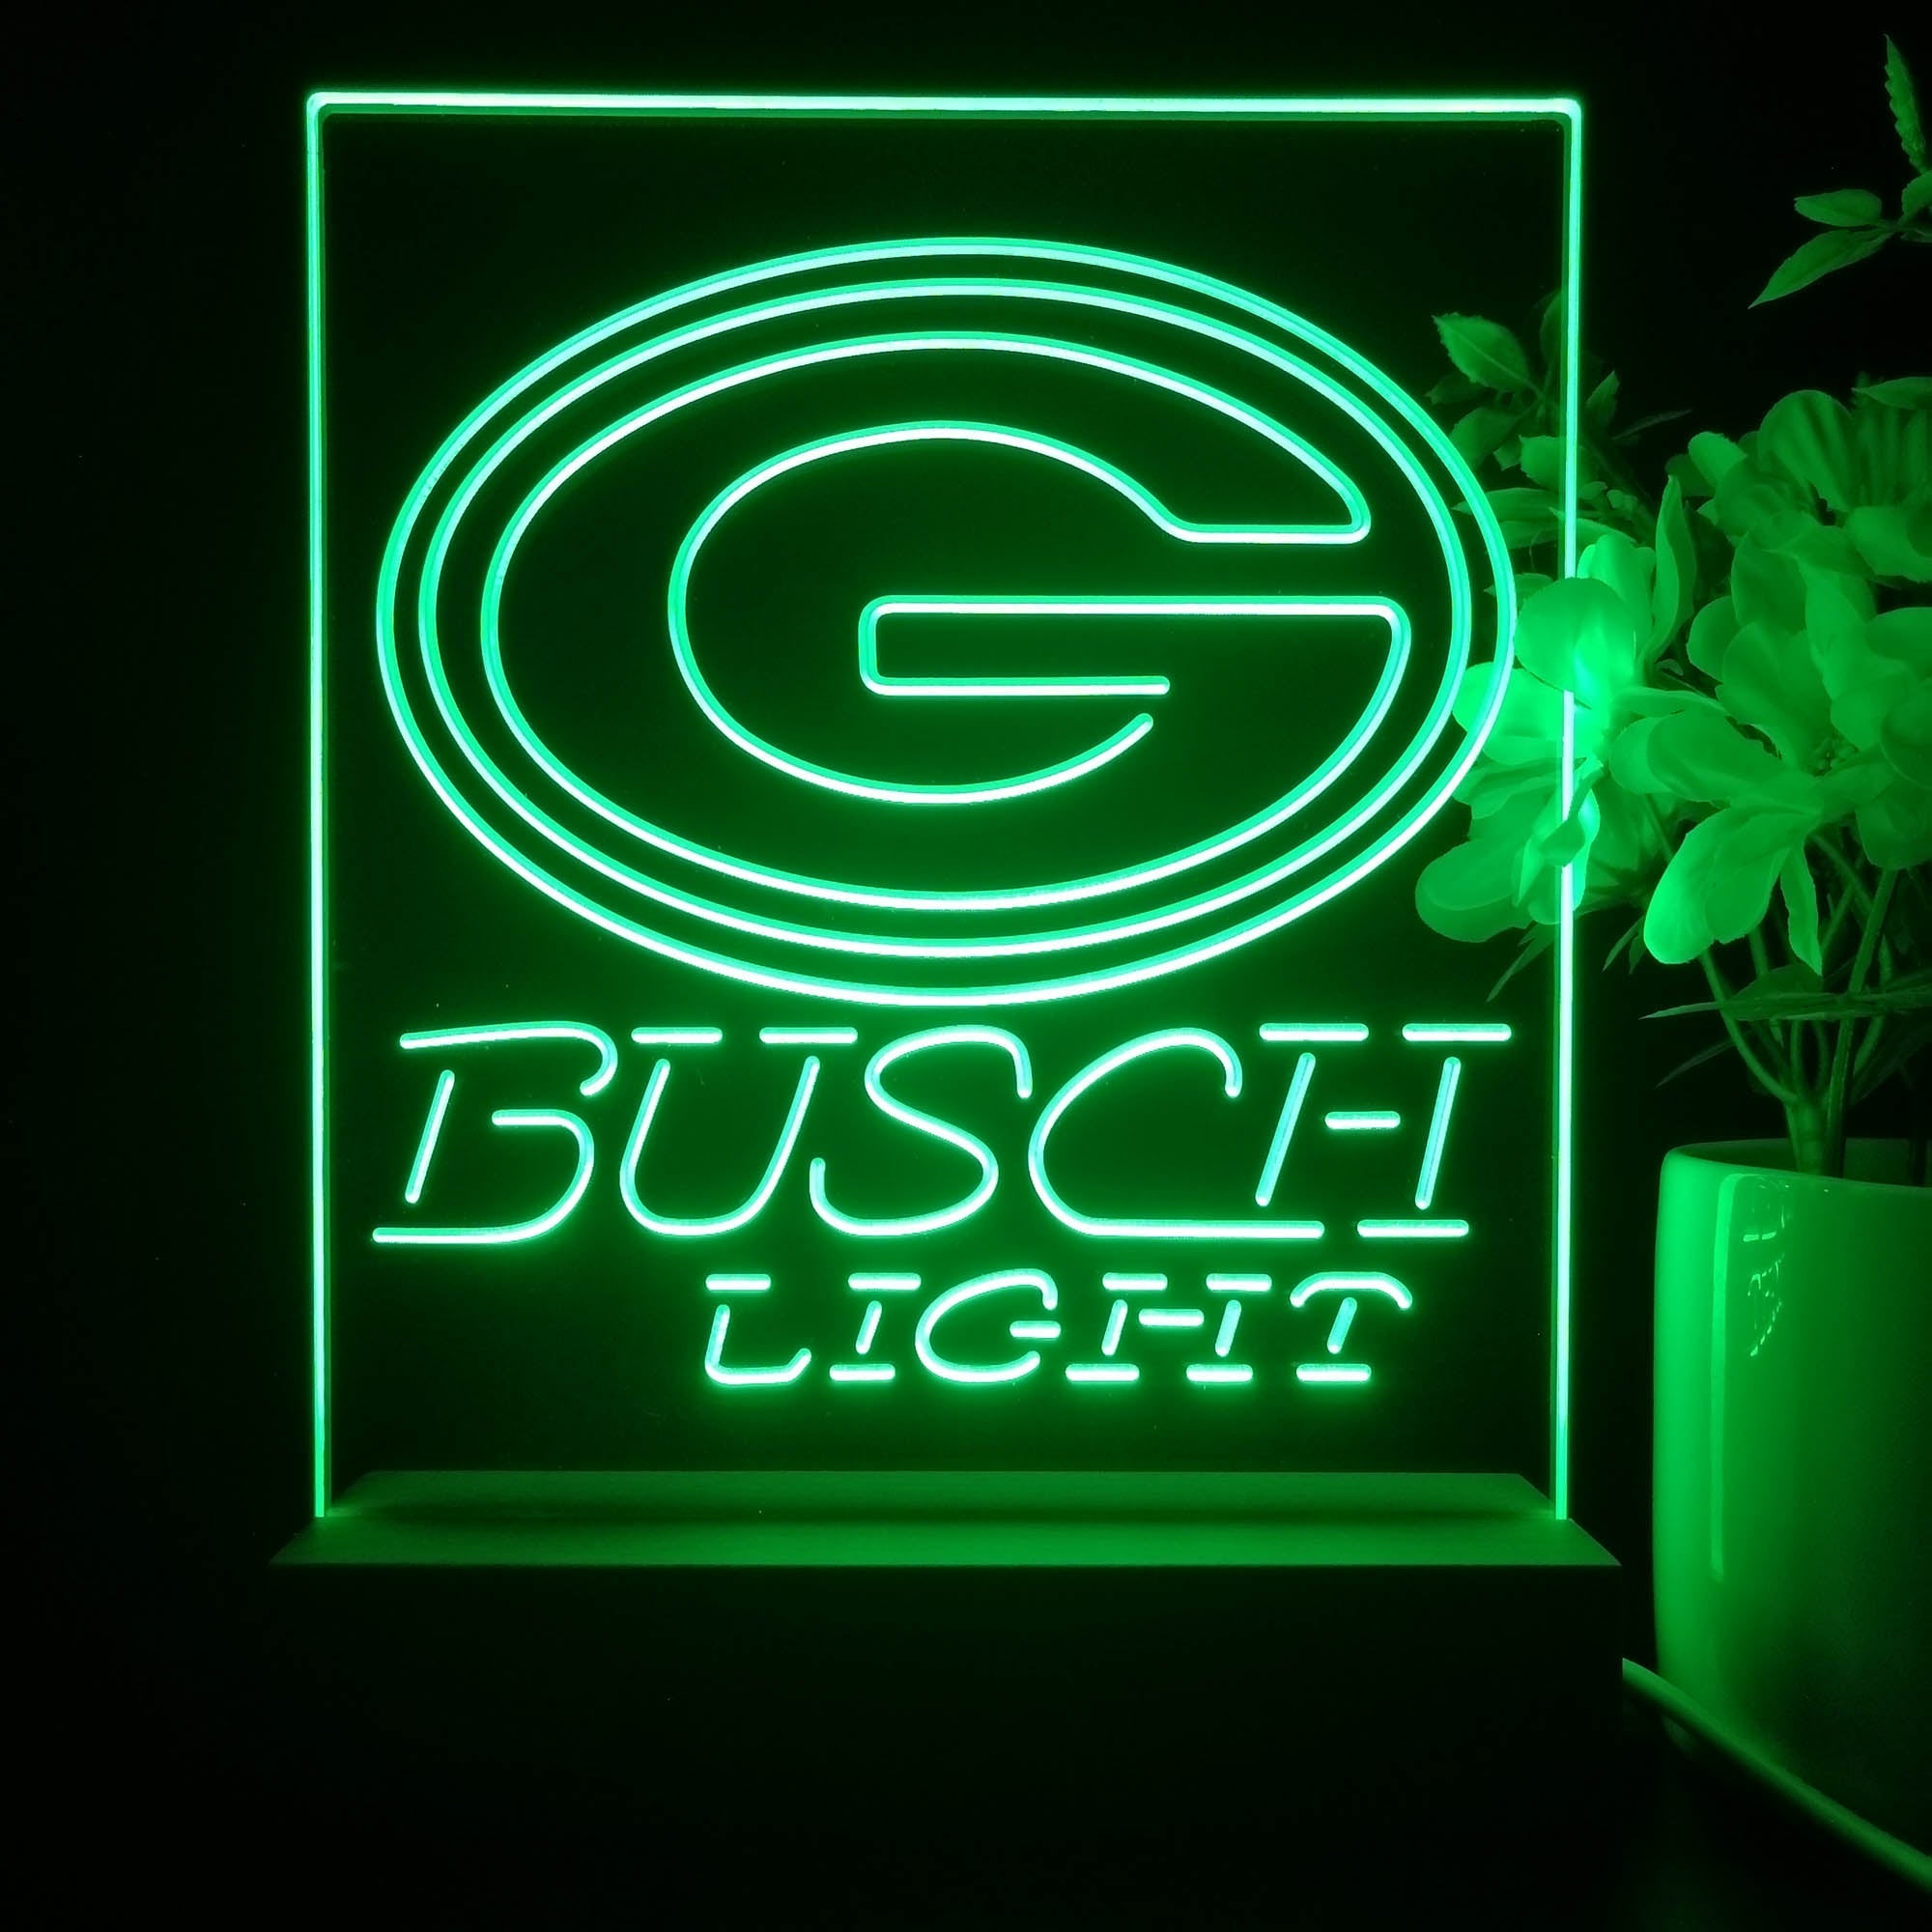 Green Bay Packers Busch Light Neon Sign Table Top Lamp